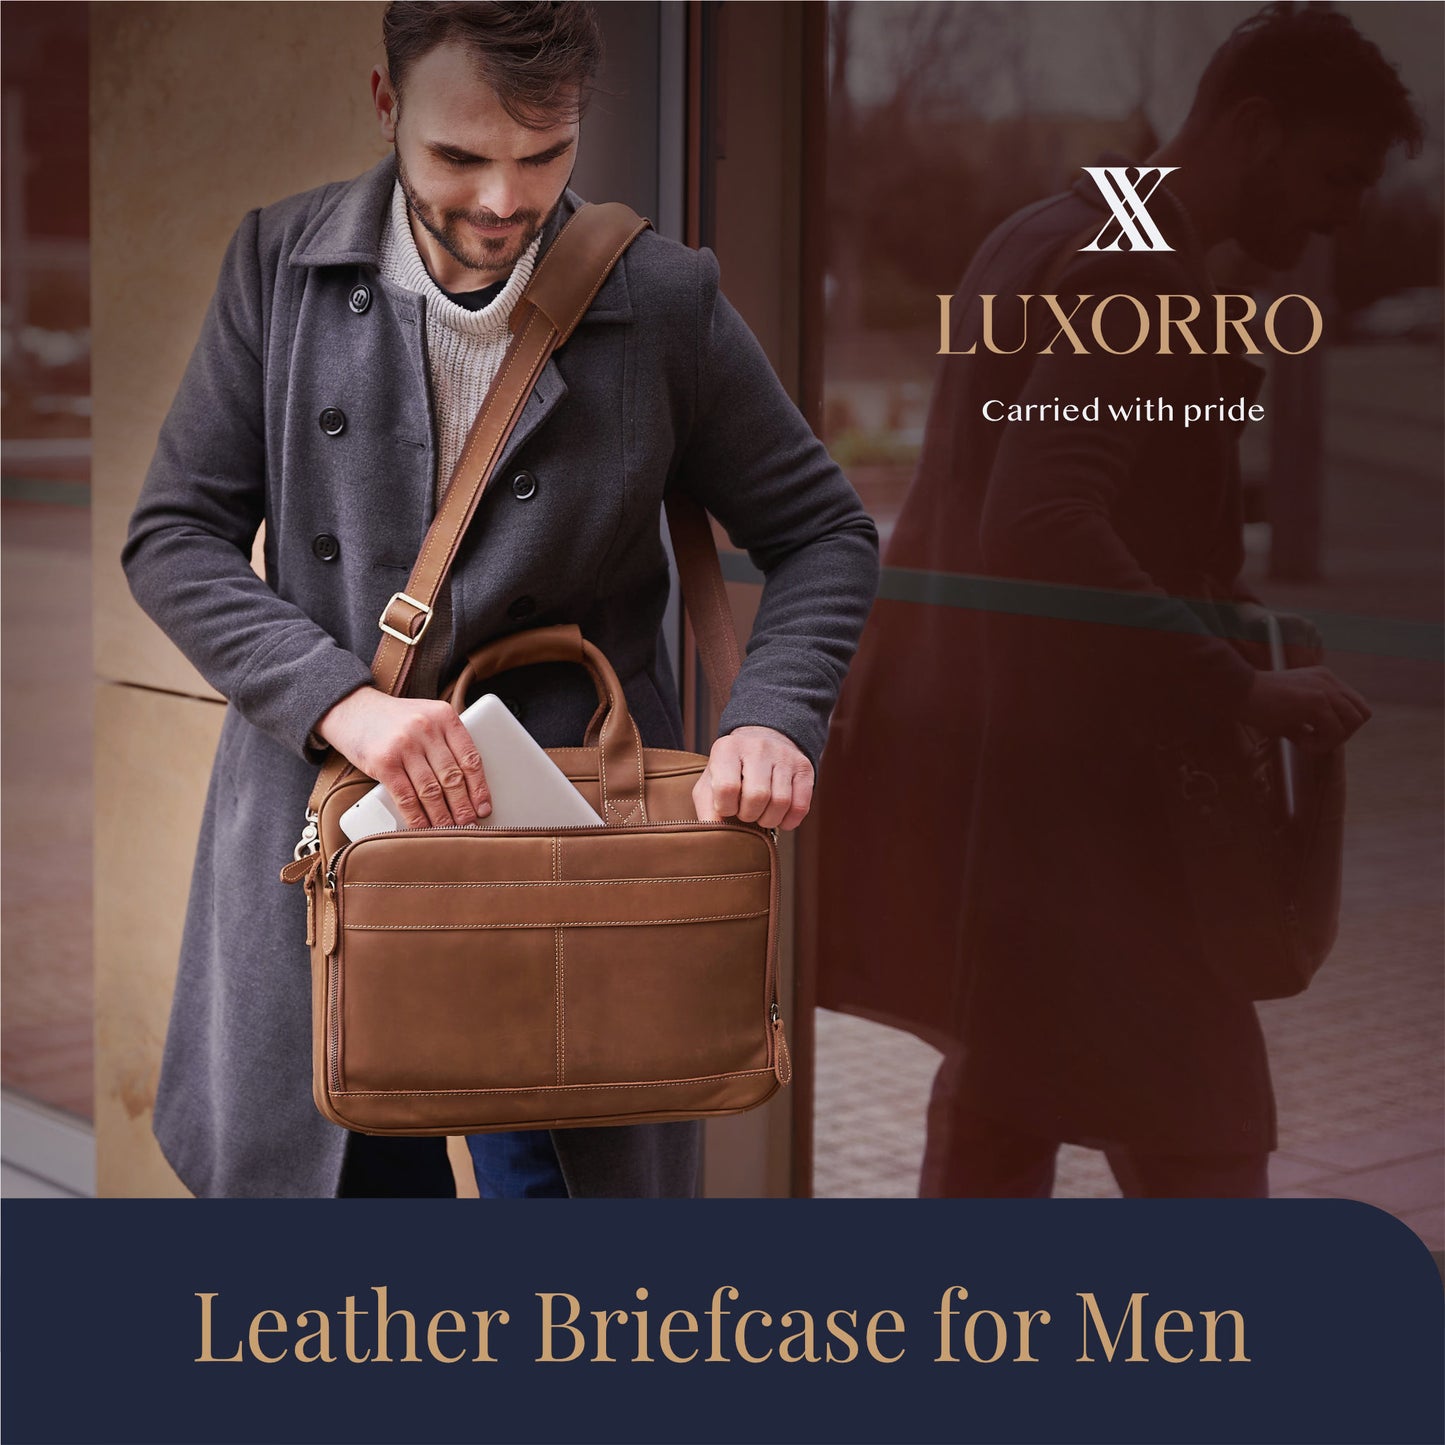 Products Luxorro Full Grain Leather Briefcases For Men in a Beautiful Gift Box, Fits 15.6" Laptop, Light Brown, 2 Compartments  - B07X11YHVH - A